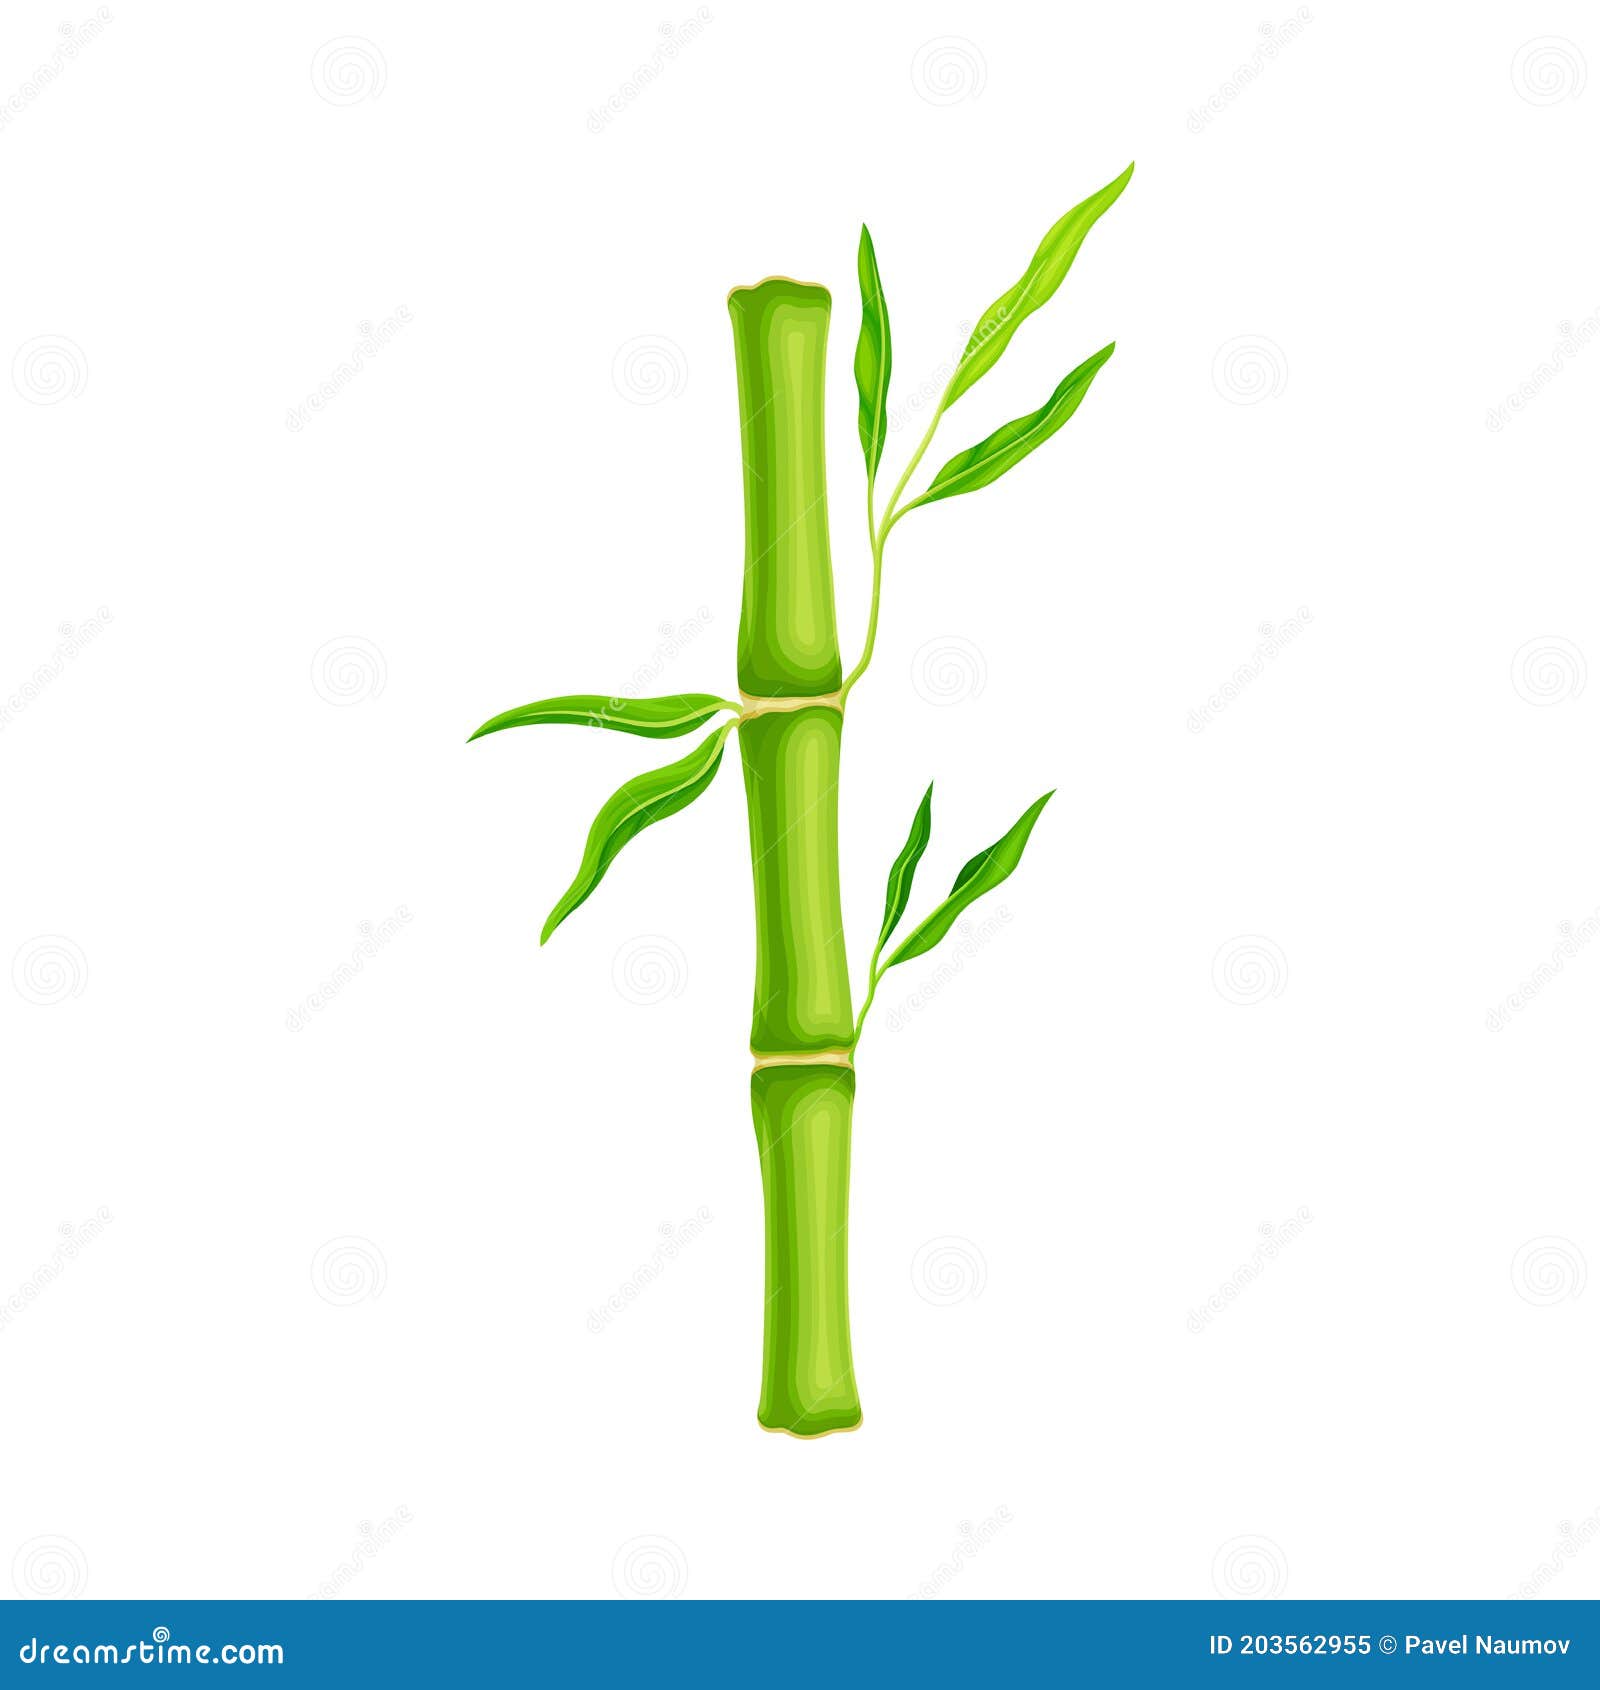 Realistic Bamboo Stick Brown And Green Tree Branch And Stems With